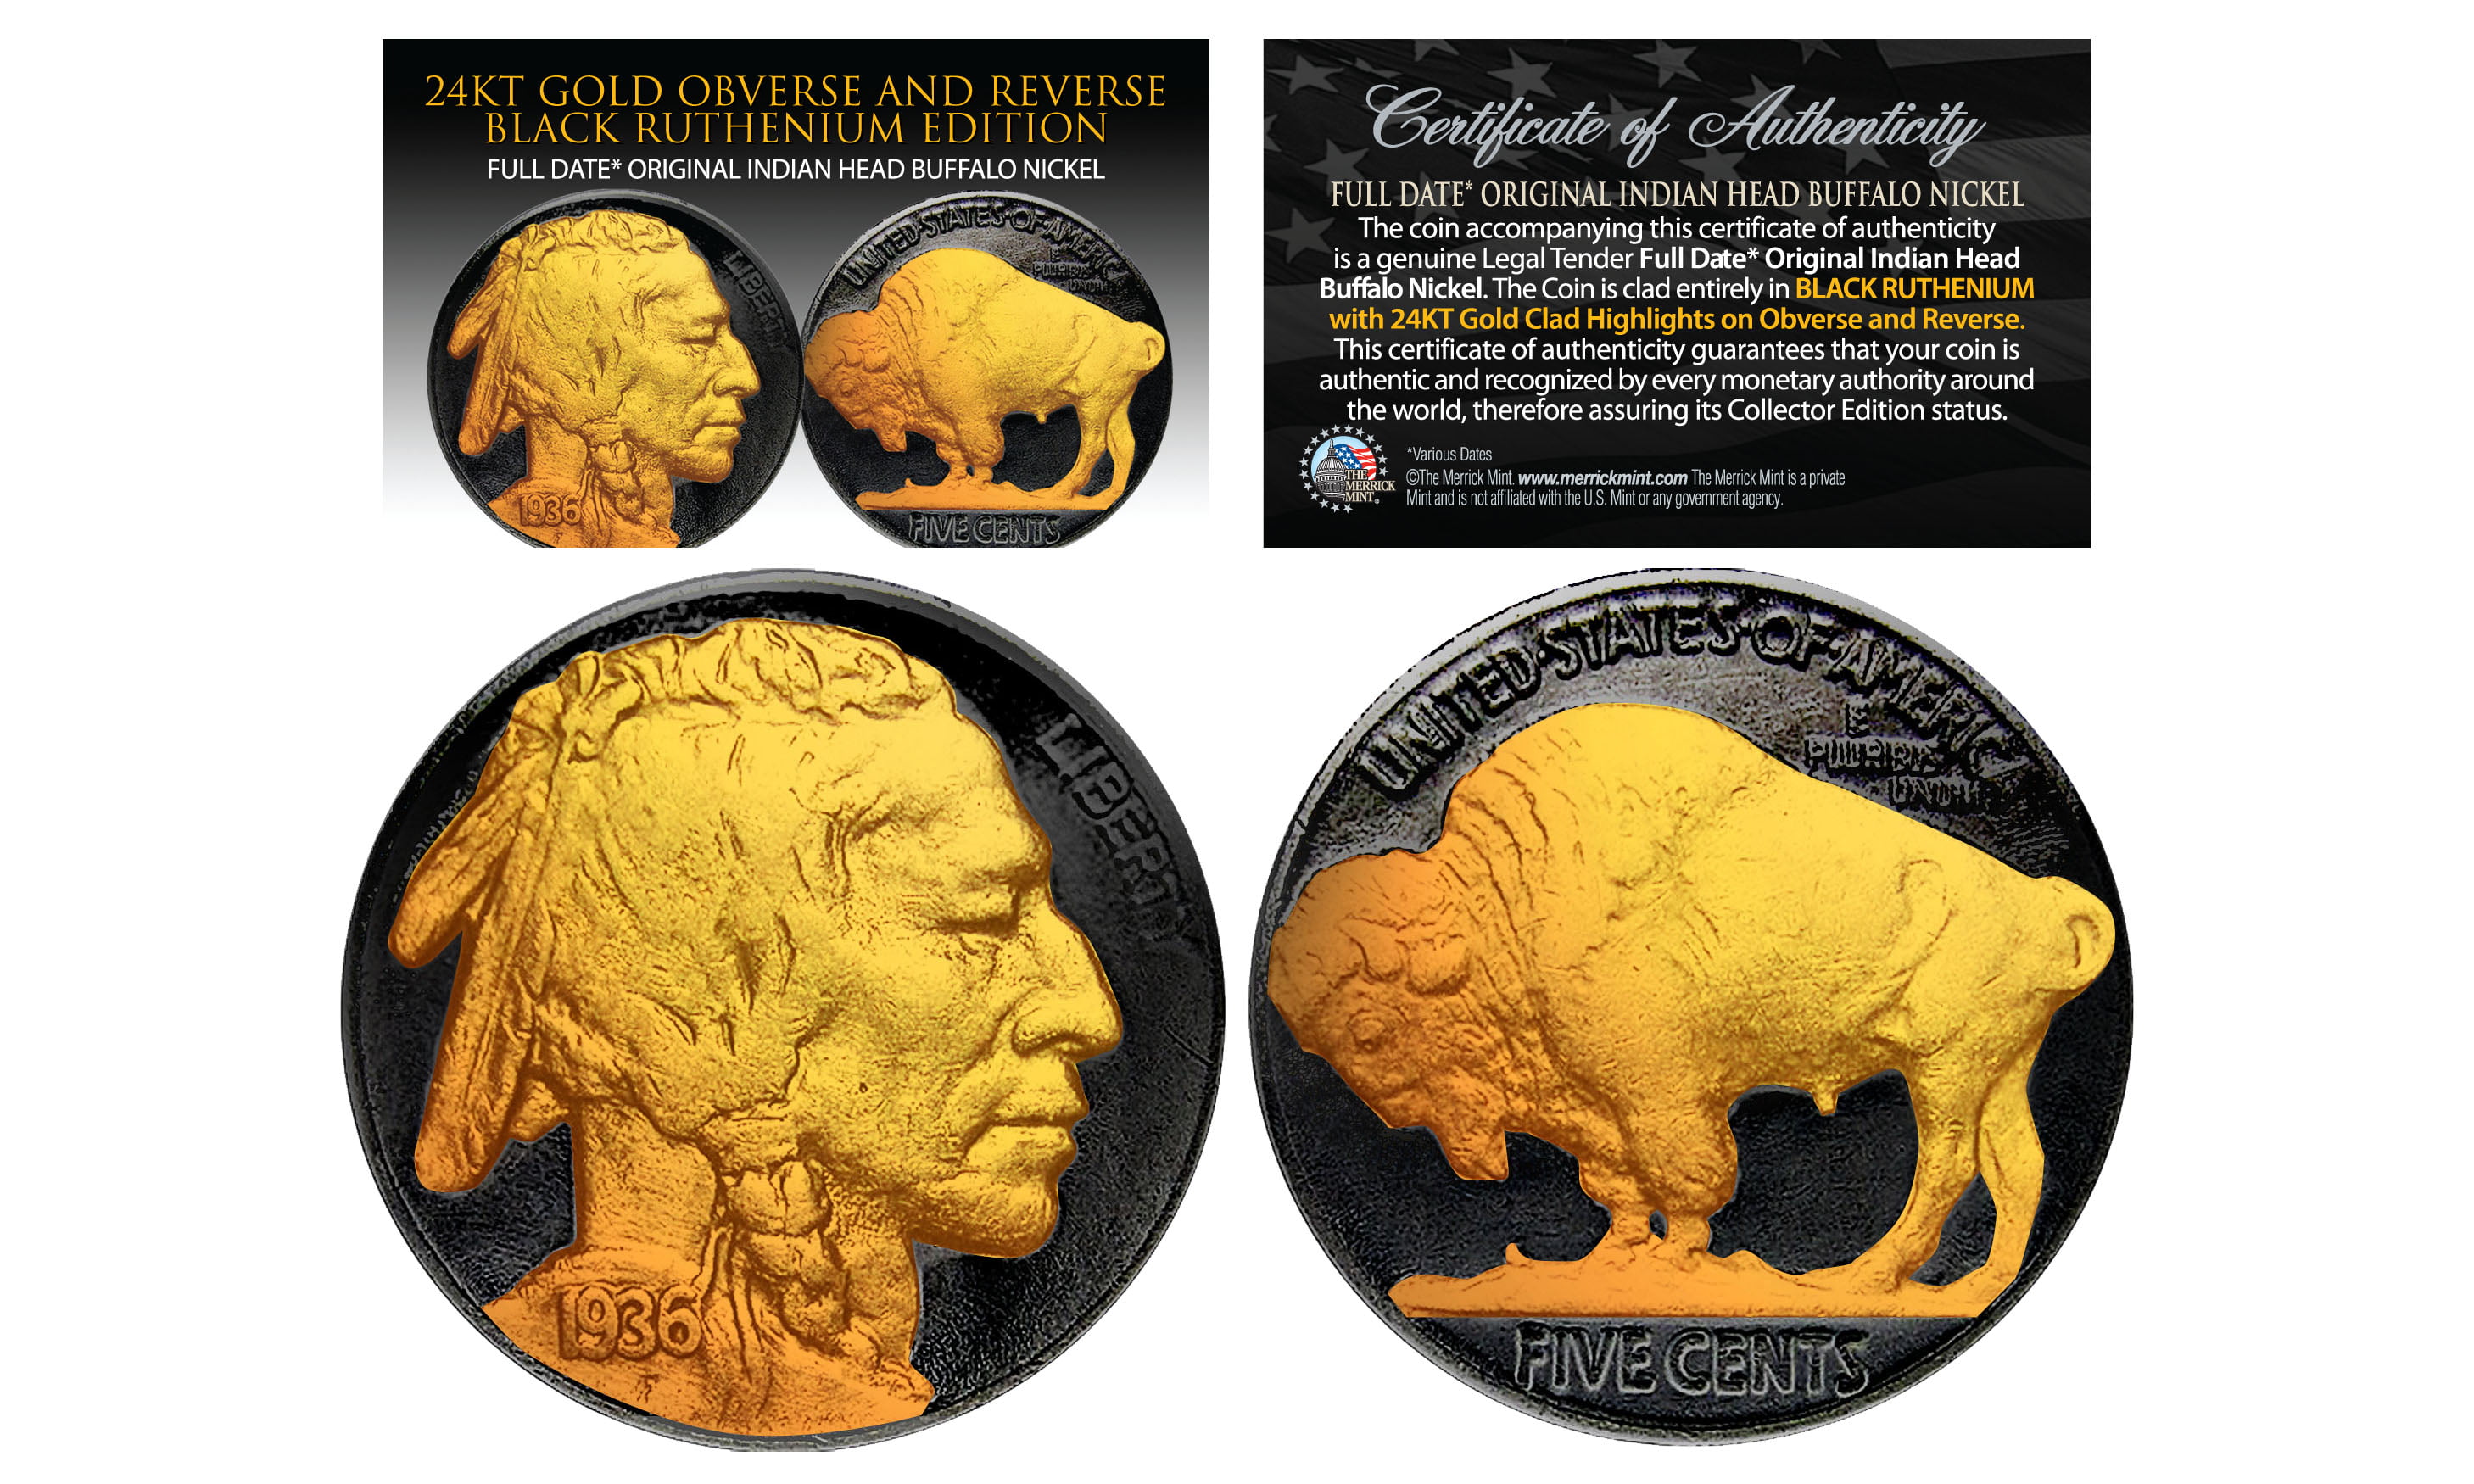 Pure 24K GOLD PLATED Authentic Buffalo Indian Head Nickel GOLD BUFFALO NICKEL